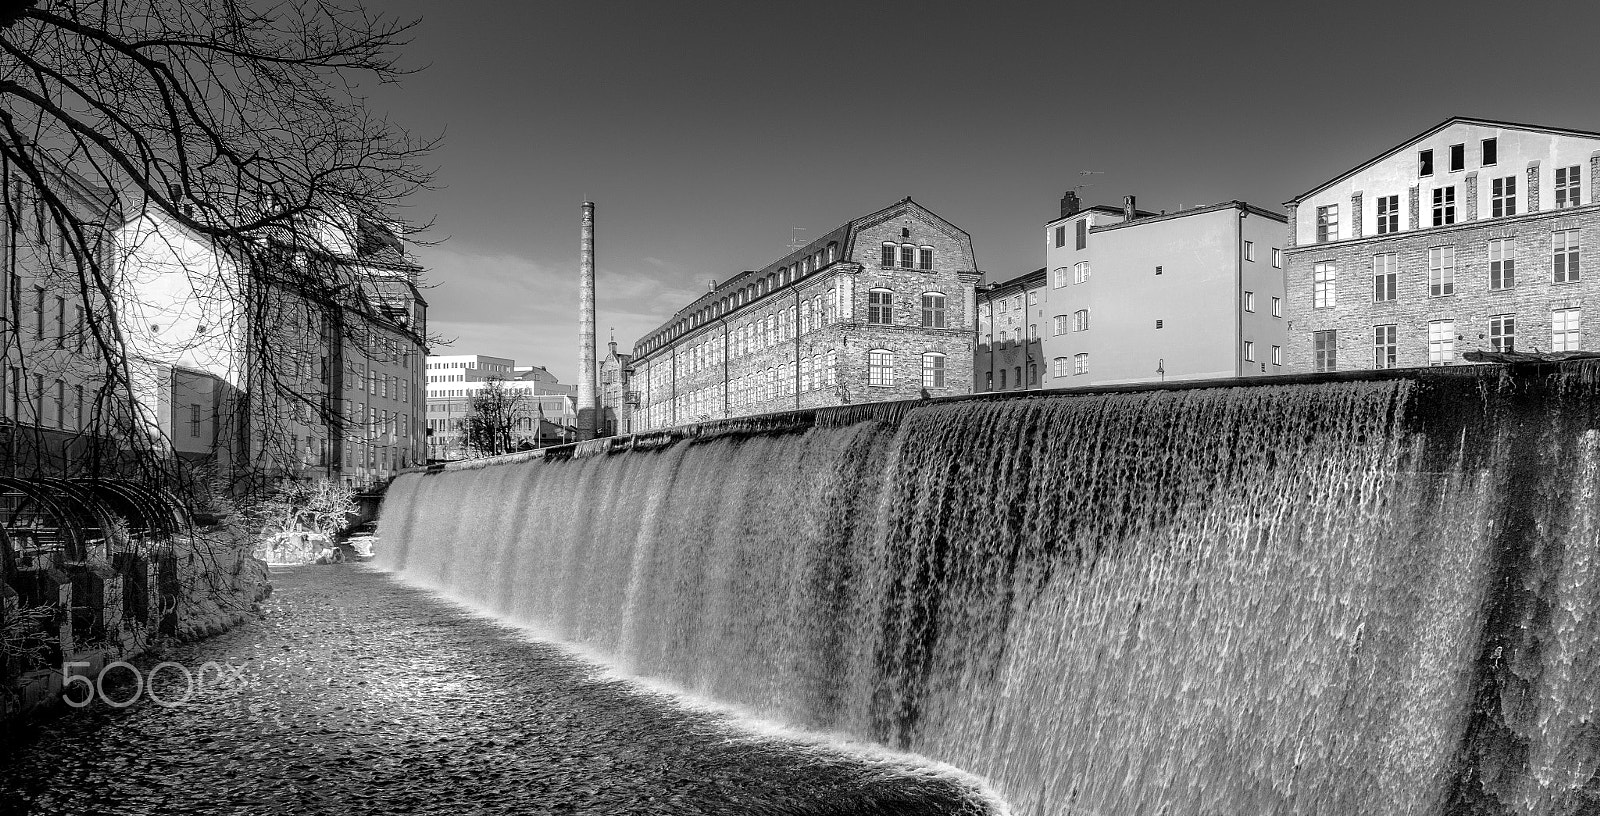 Sony a7 II sample photo. Waterfall in old industrial landscape of norrköping photography